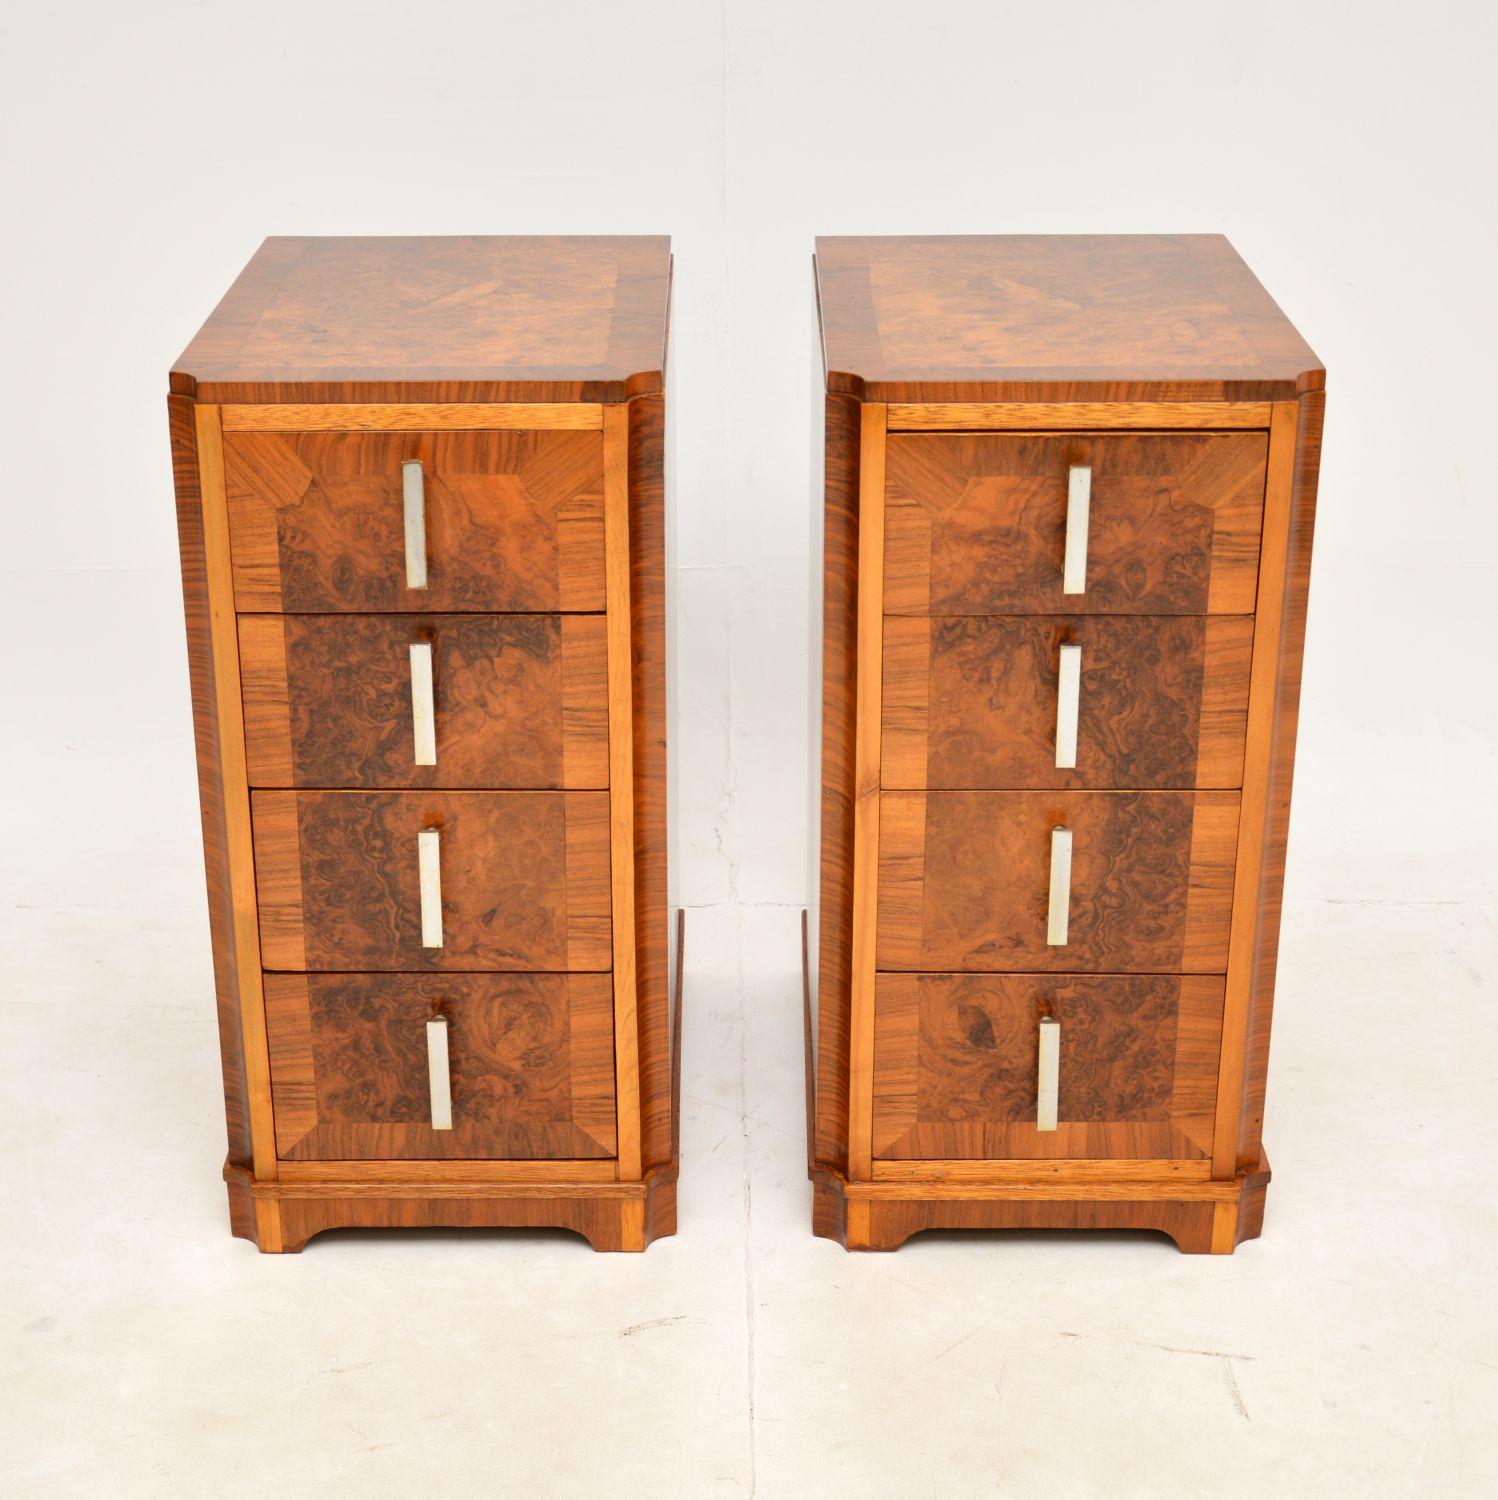 A fantastic pair of Art Deco period bedside chests in walnut. They were made in England, and they date from the 1920-1930s.

The quality is outstanding, they are a great size and have lots of storage space. The canted corners are beautifully